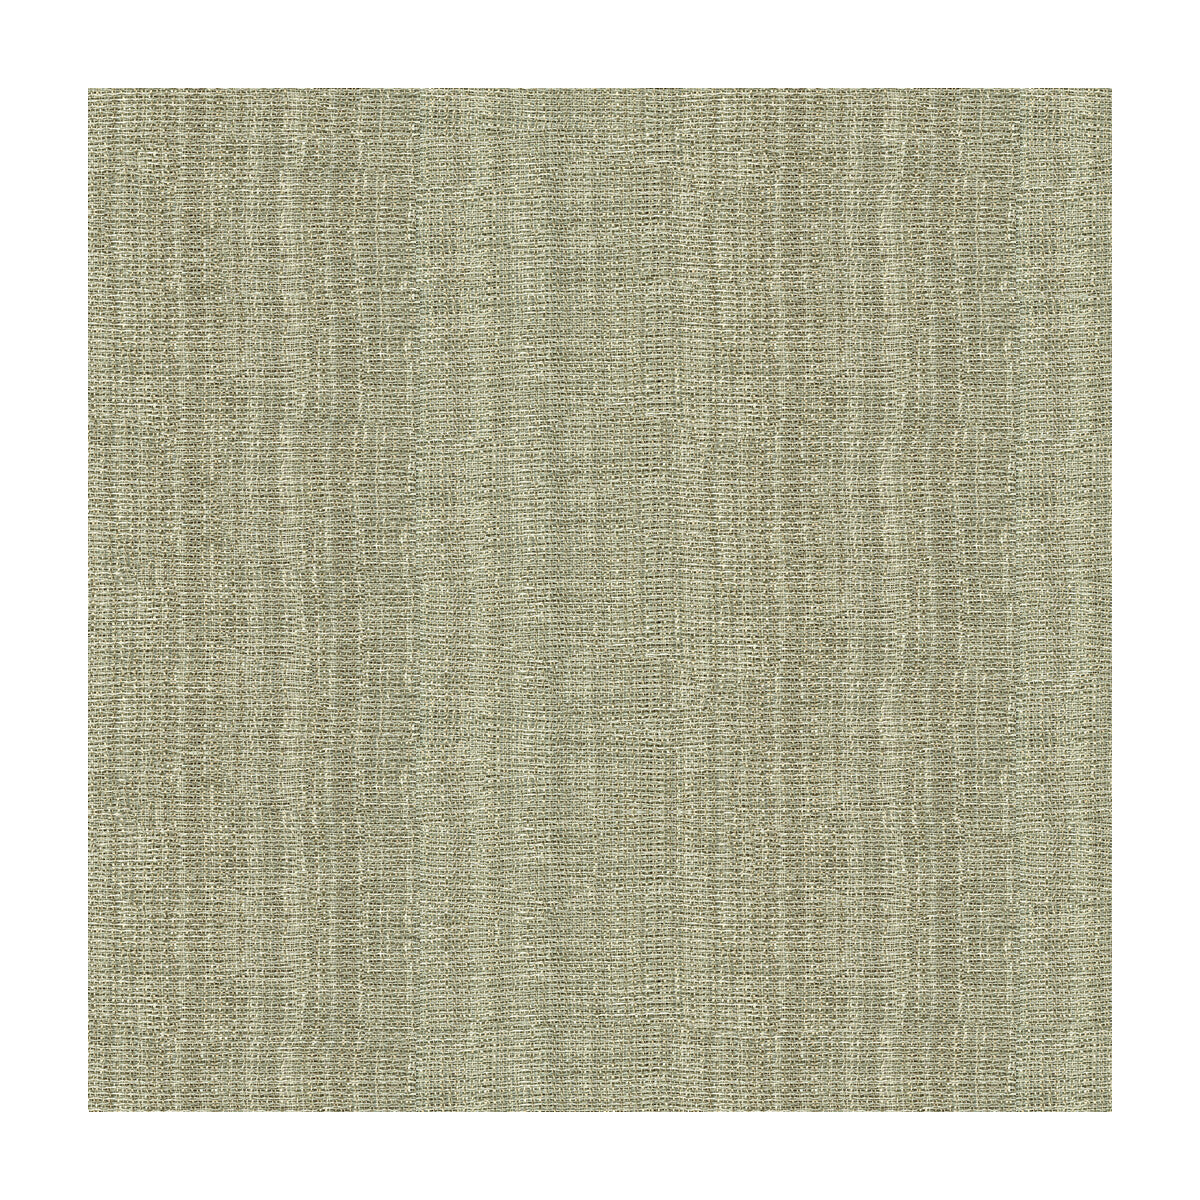 Kravet Contract fabric in 4161-11 color - pattern 4161.11.0 - by Kravet Contract